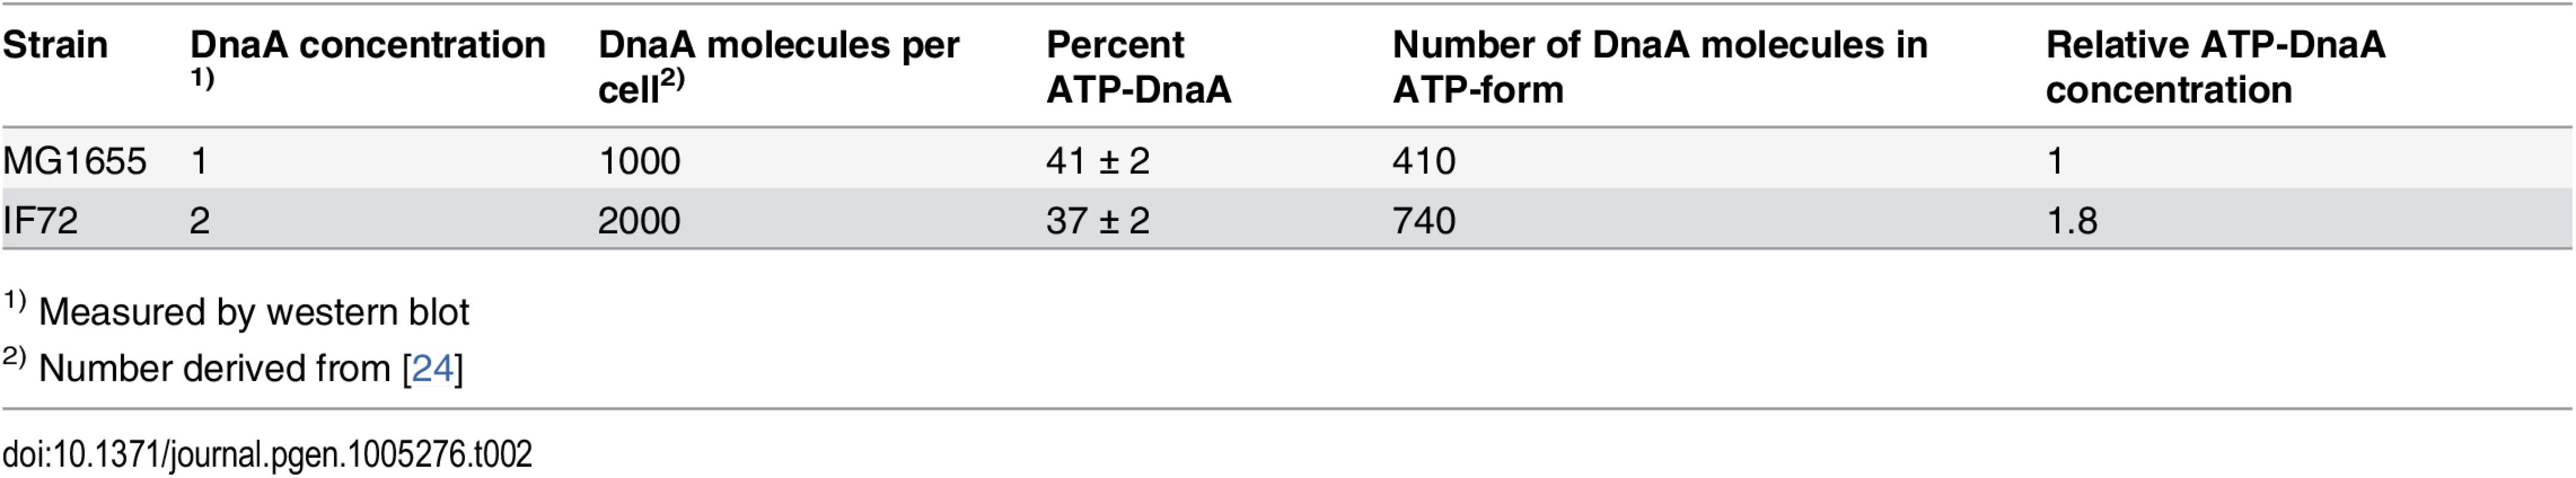 Percentage of ATP-DnaA protein in cells with 2 x DnaA.